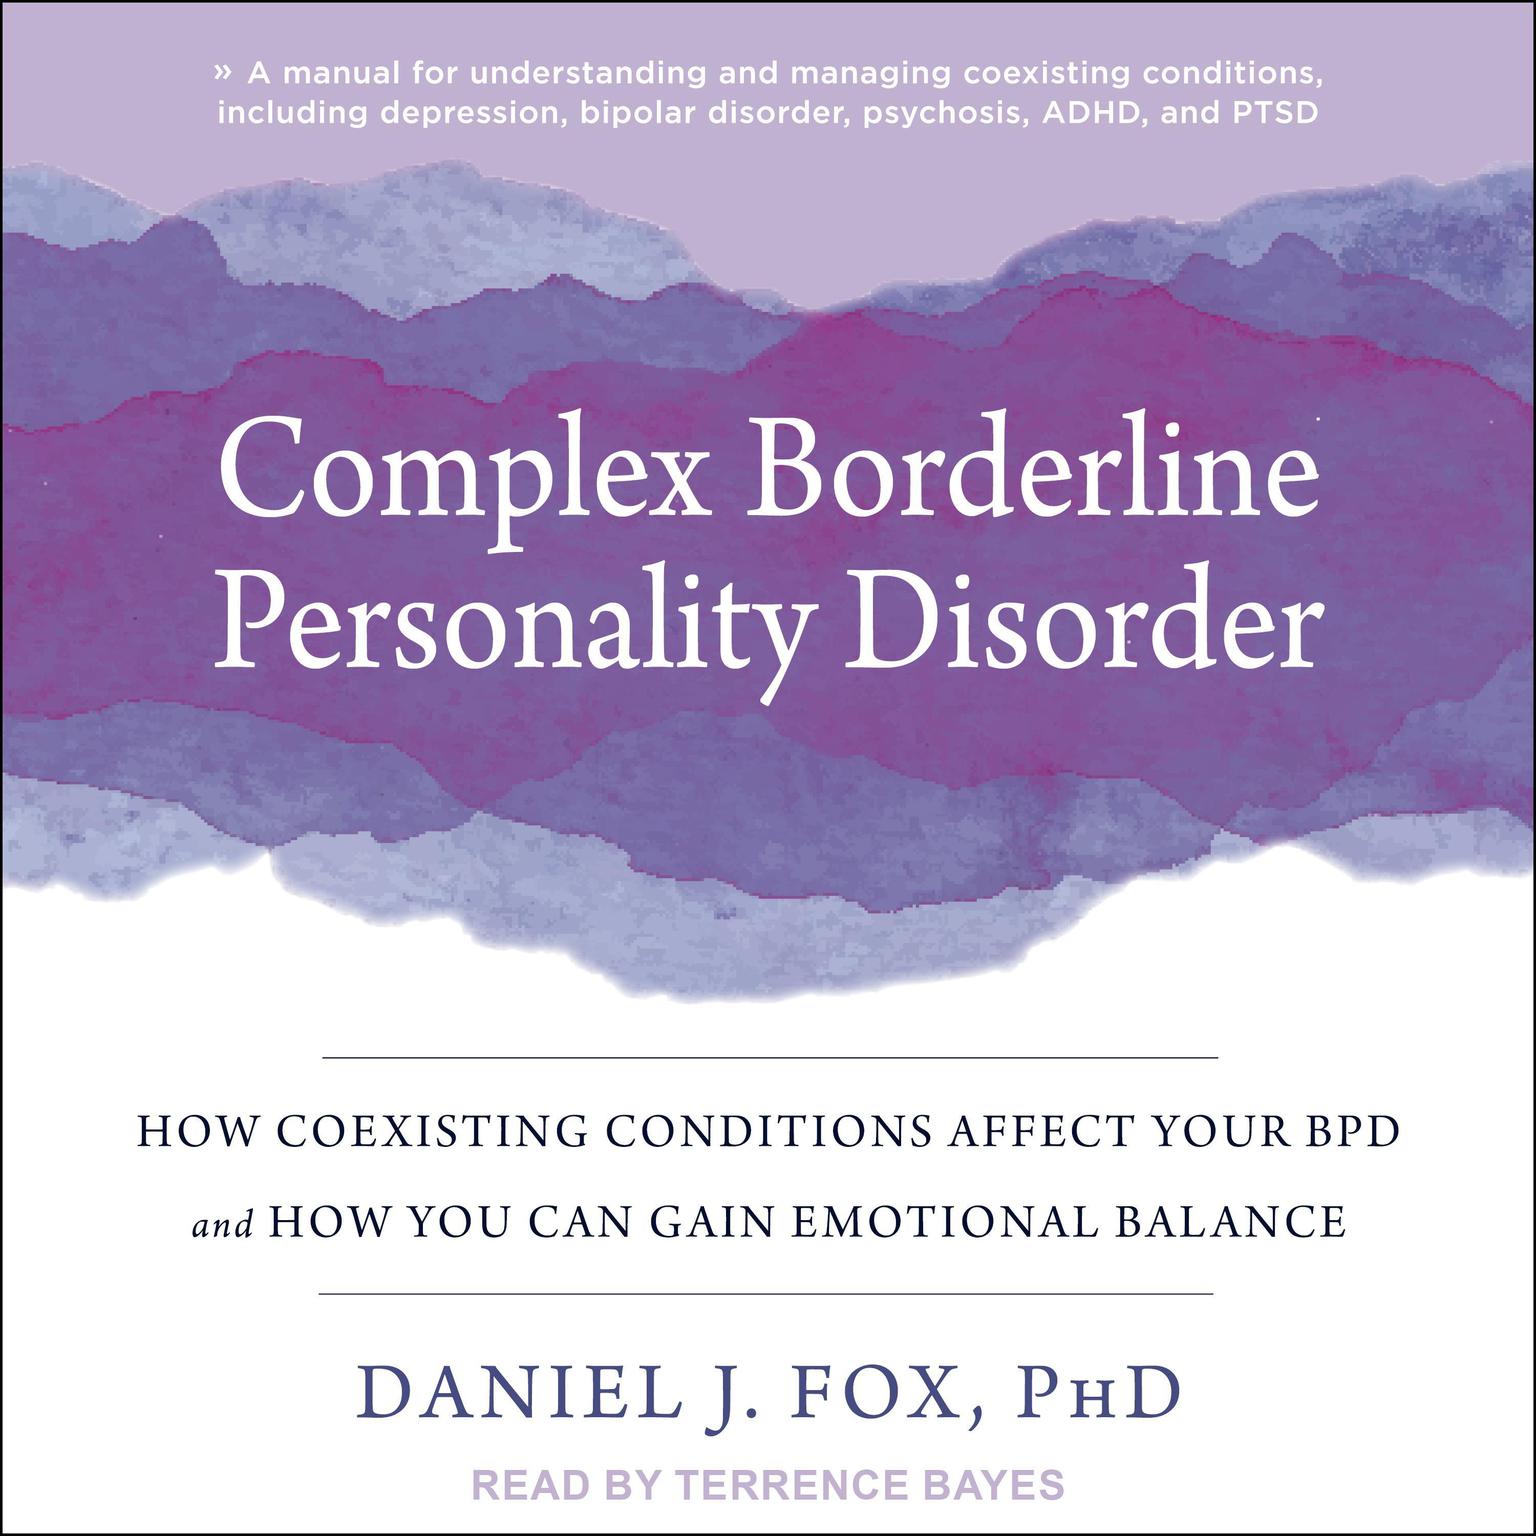 Complex Borderline Personality Disorder: How Coexisting Conditions Affect Your BPD and How You Can Gain Emotional Balance Audiobook, by Daniel J. Fox